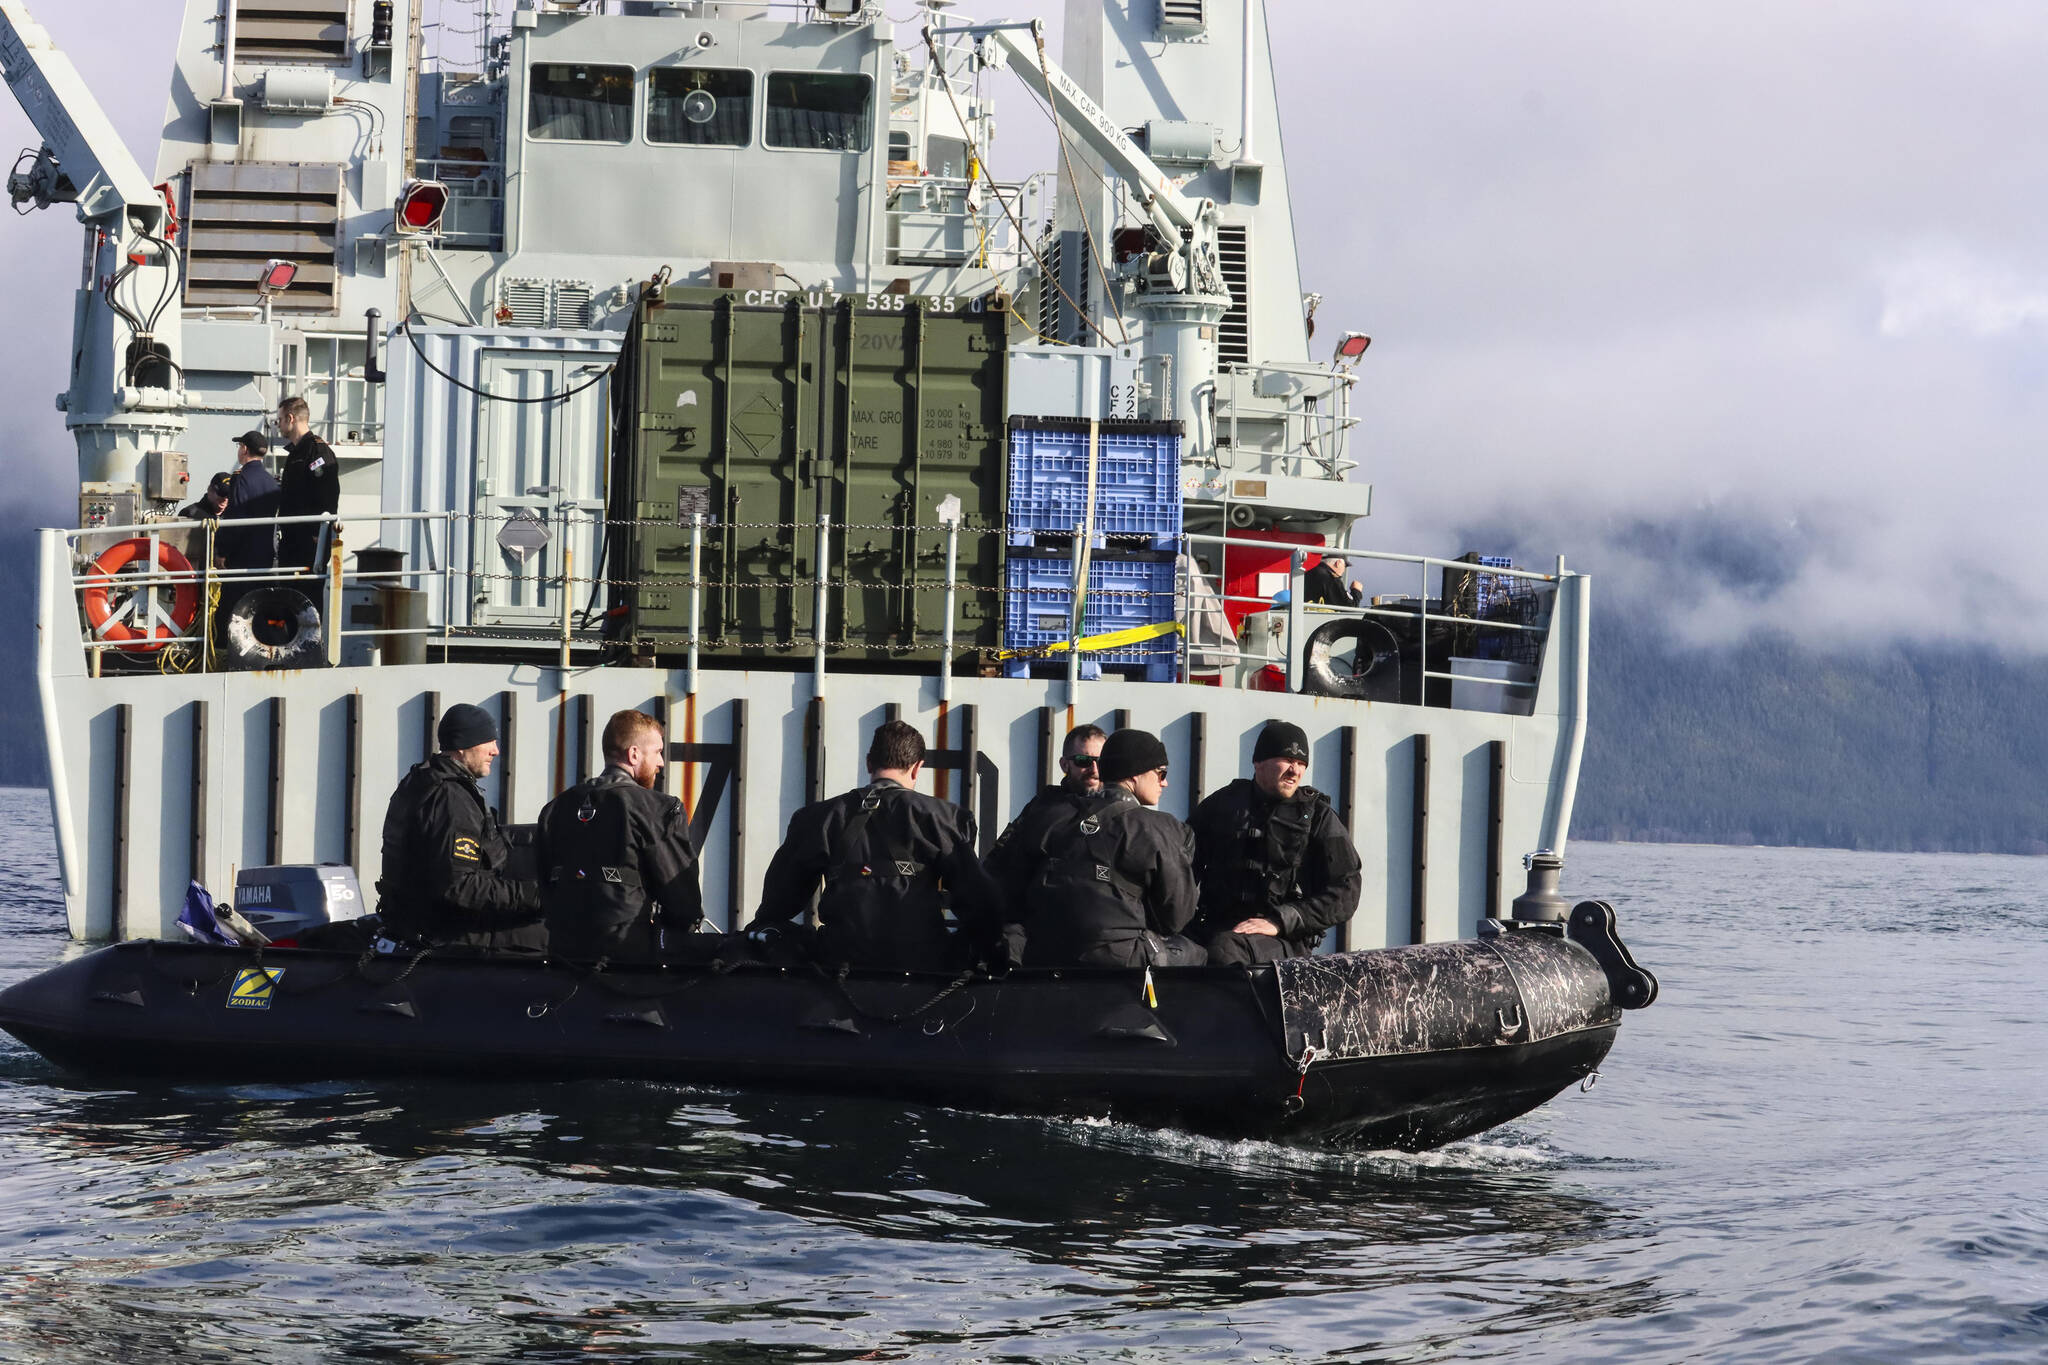 Royal Canadian Navy divers navigate aft of Her Majesty’s Canadian Ship Brandon to go investigate a simulated naval mine in Stephens Passage on March 6, 2022, as part of exercise Arctic Edge 2022. (Michael S. Lockett / Juneau Empire)